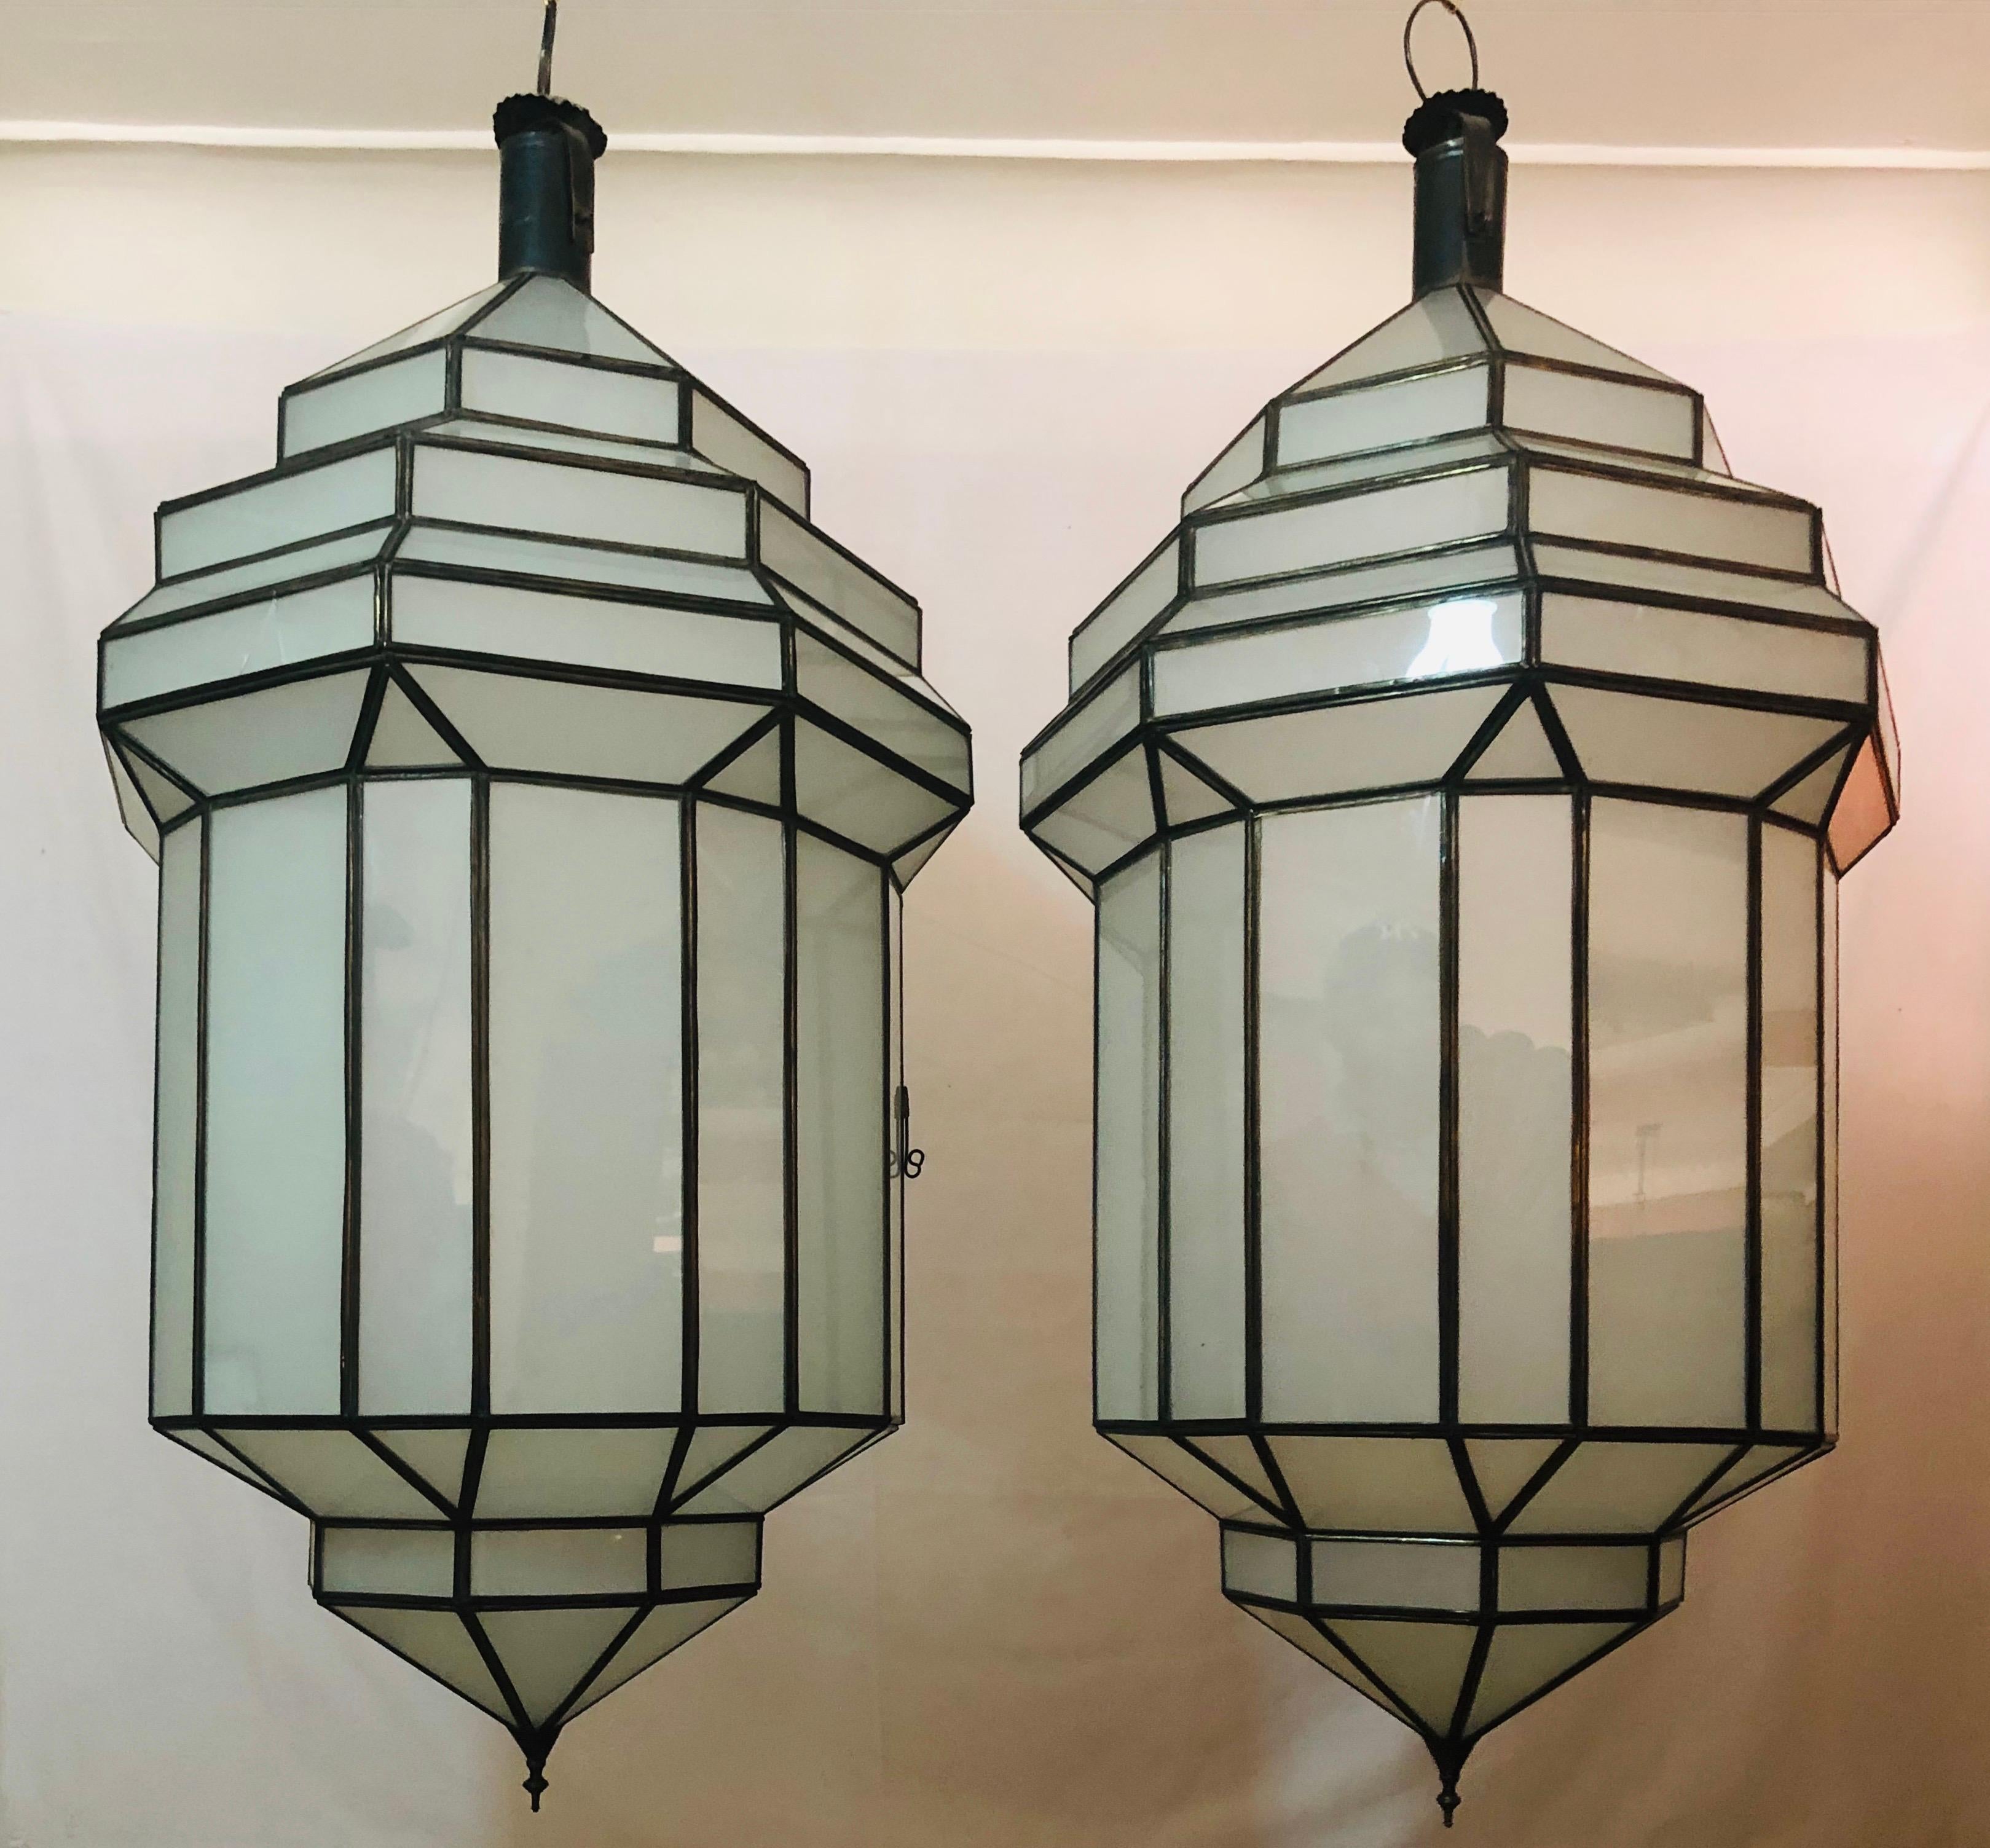 Large Art Deco White Milk Glass Handmade Chandelier, Pendant, Lantern, a Pair
A gorgeous handcrafted, having individual panes, pair of large Art Deco hanging lanterns or ceiling fixtures featuring sandblasted frosted milky glass and patinated metal